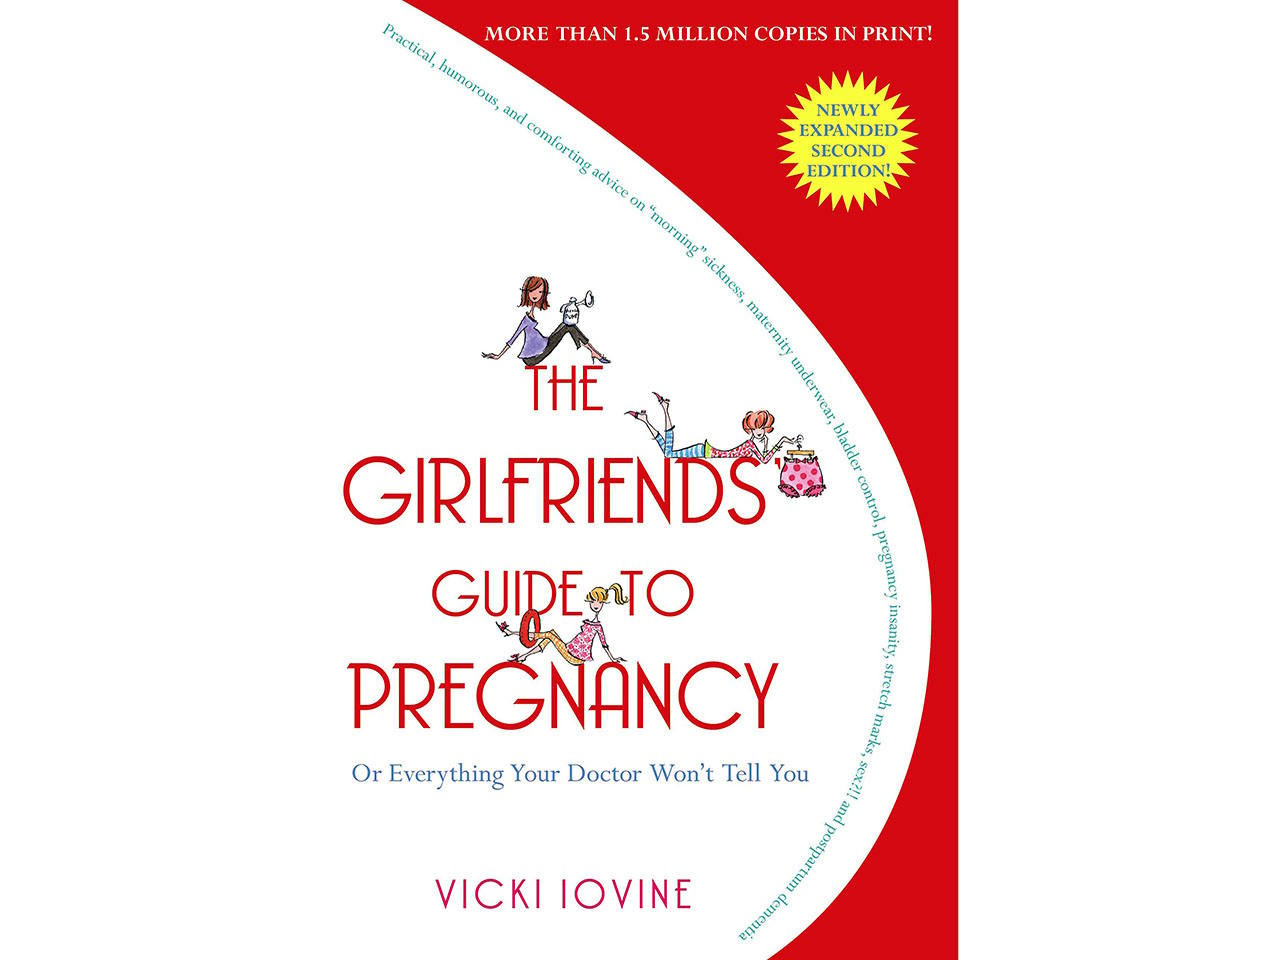 The cover of the pregnancy book The Girlfriend's guide to pregnancy